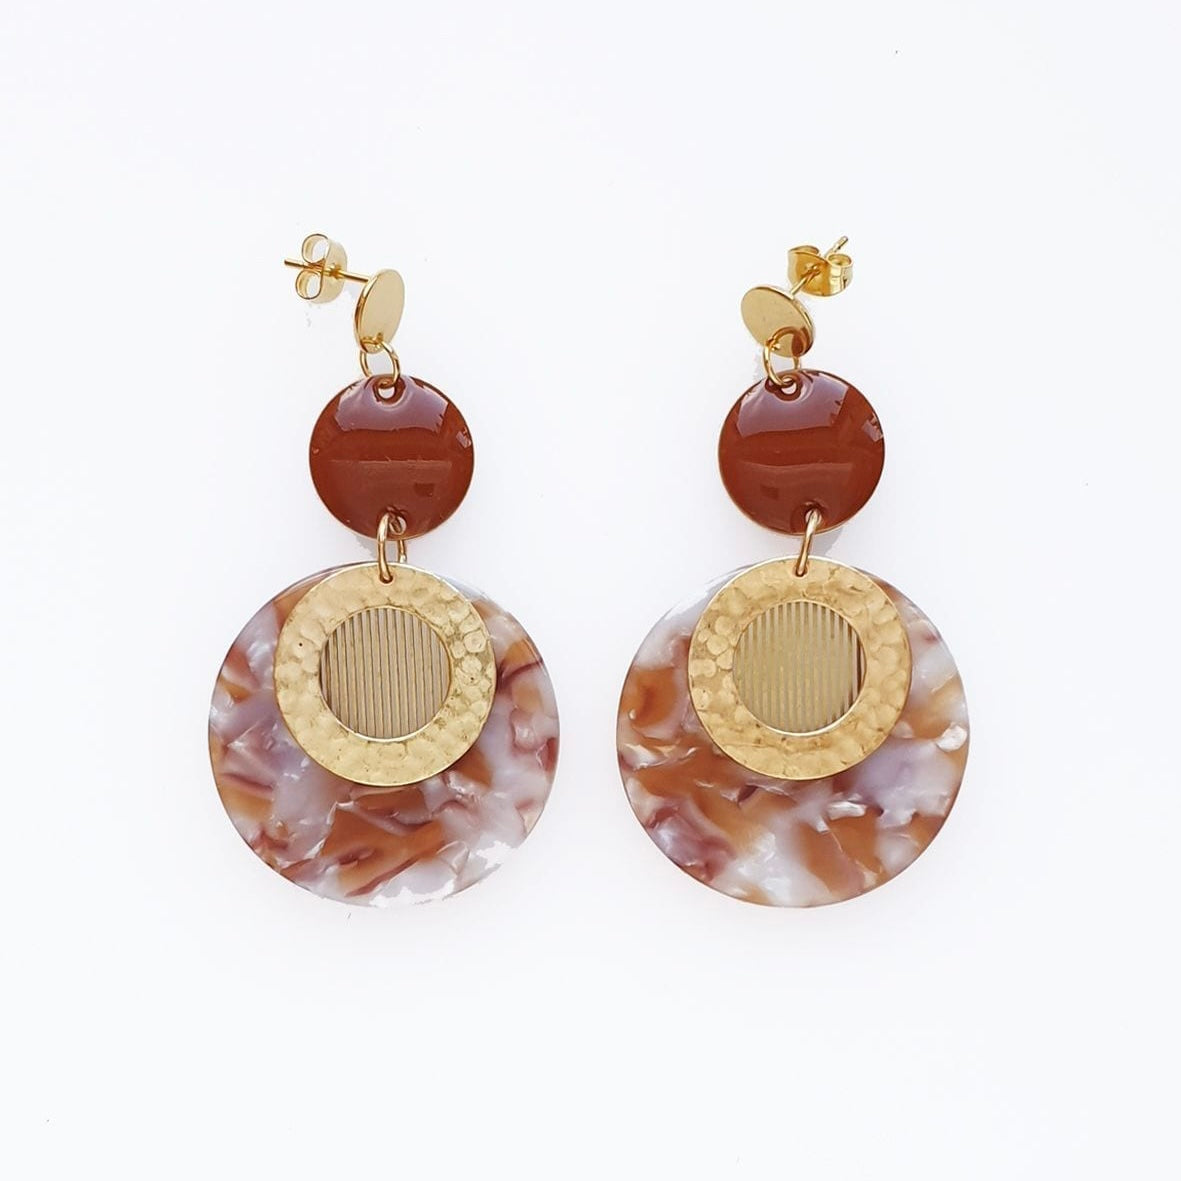 Middle Child Earrings Halo Brown